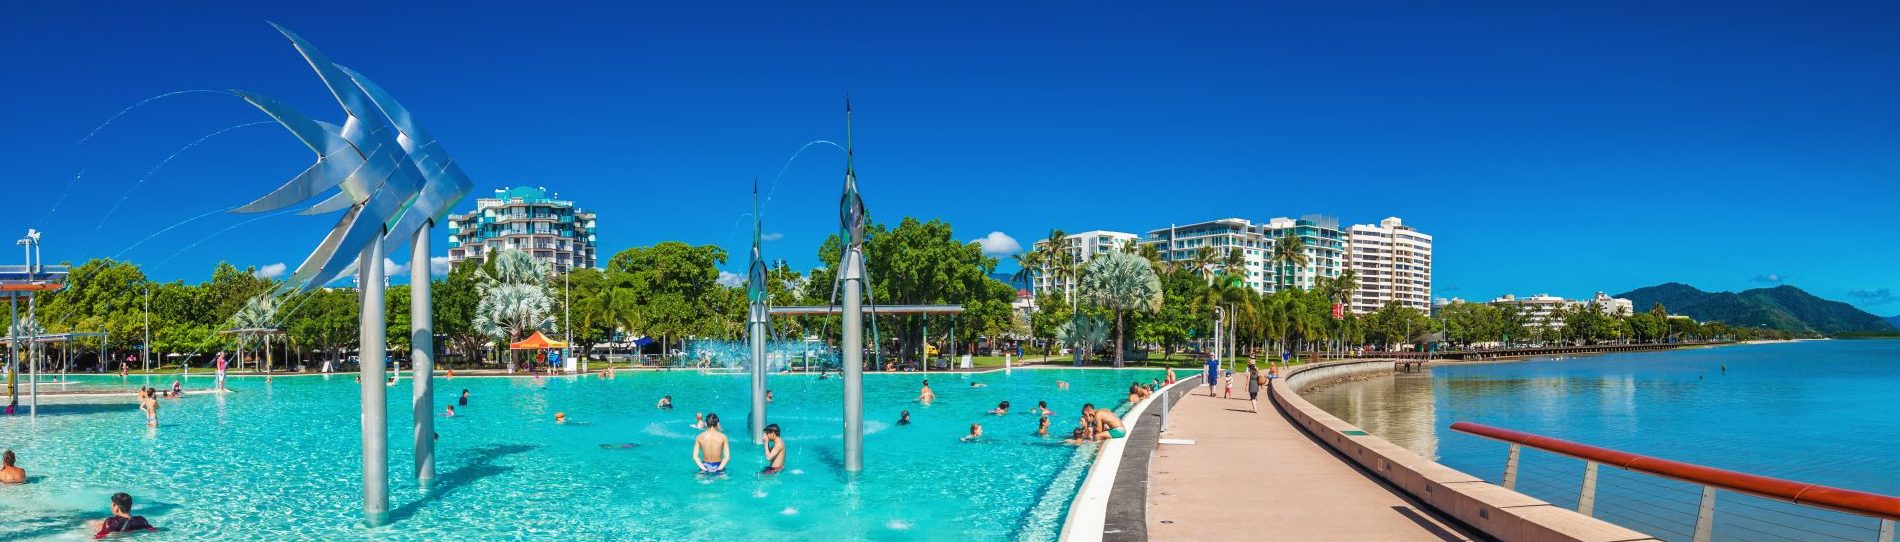 The main pool in Cairns